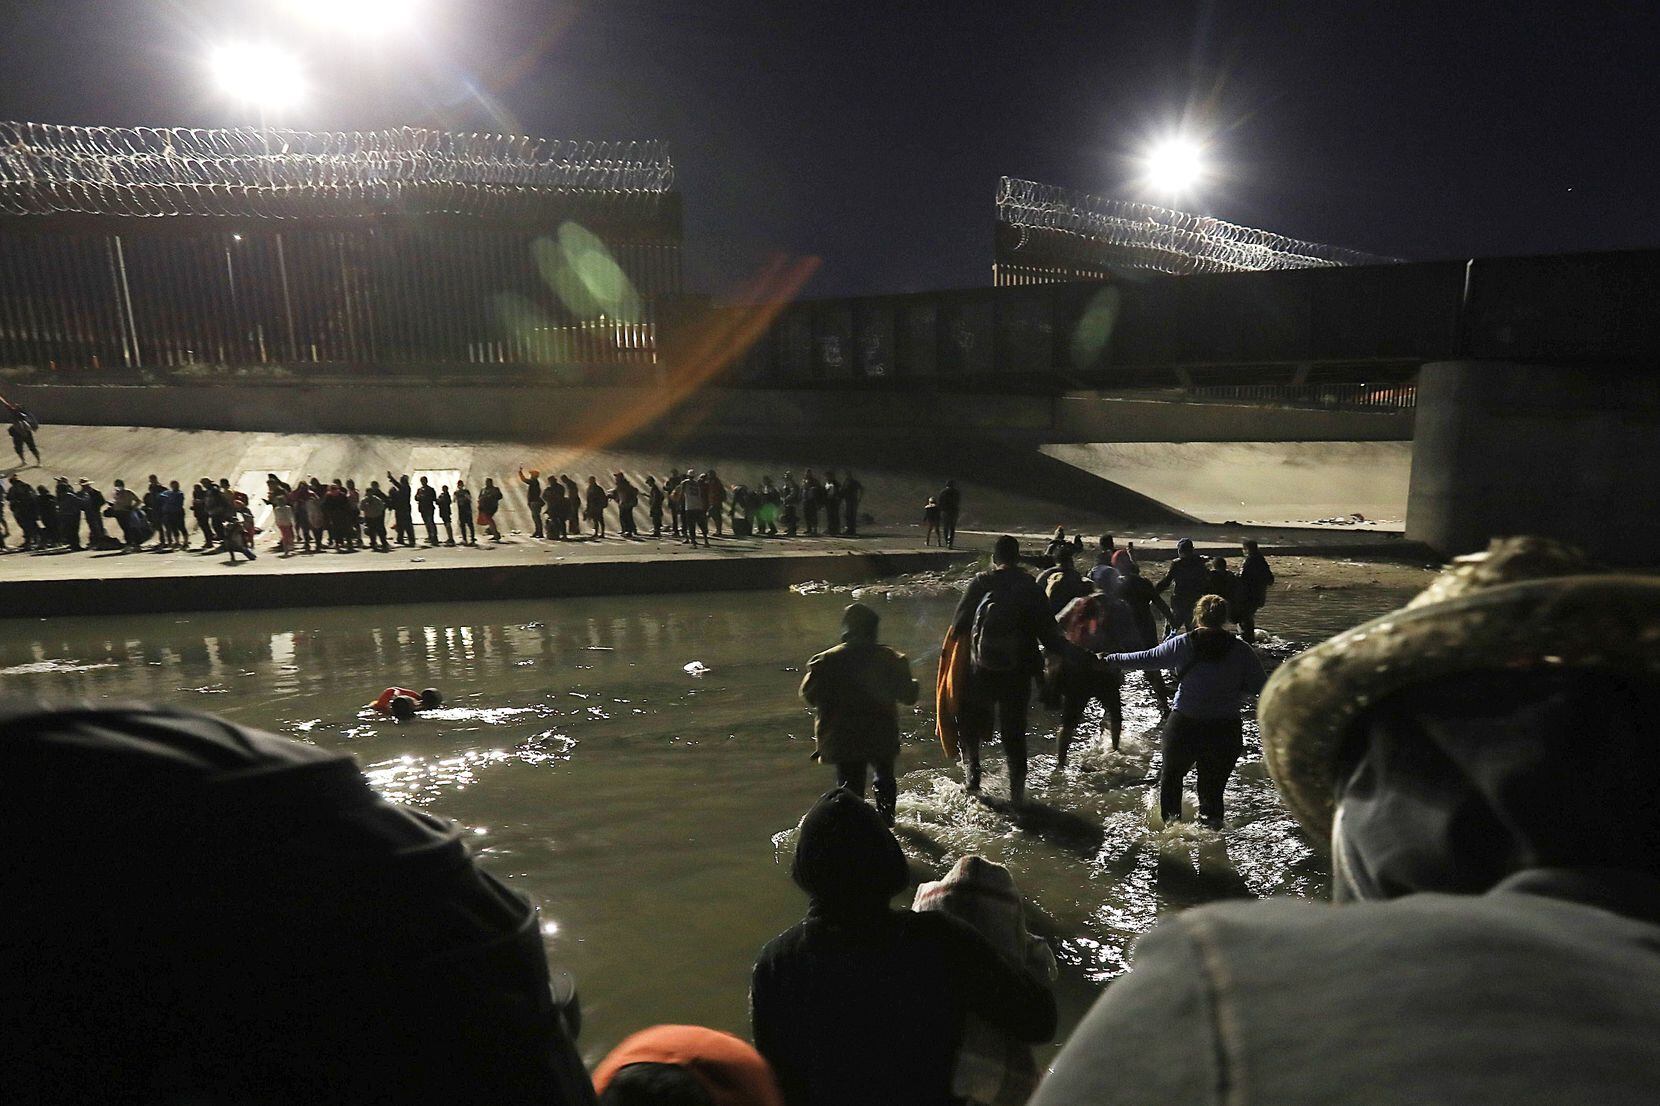 Ongoing negotiations between U.S. and Mexican officials come as more than 1,500 migrants...